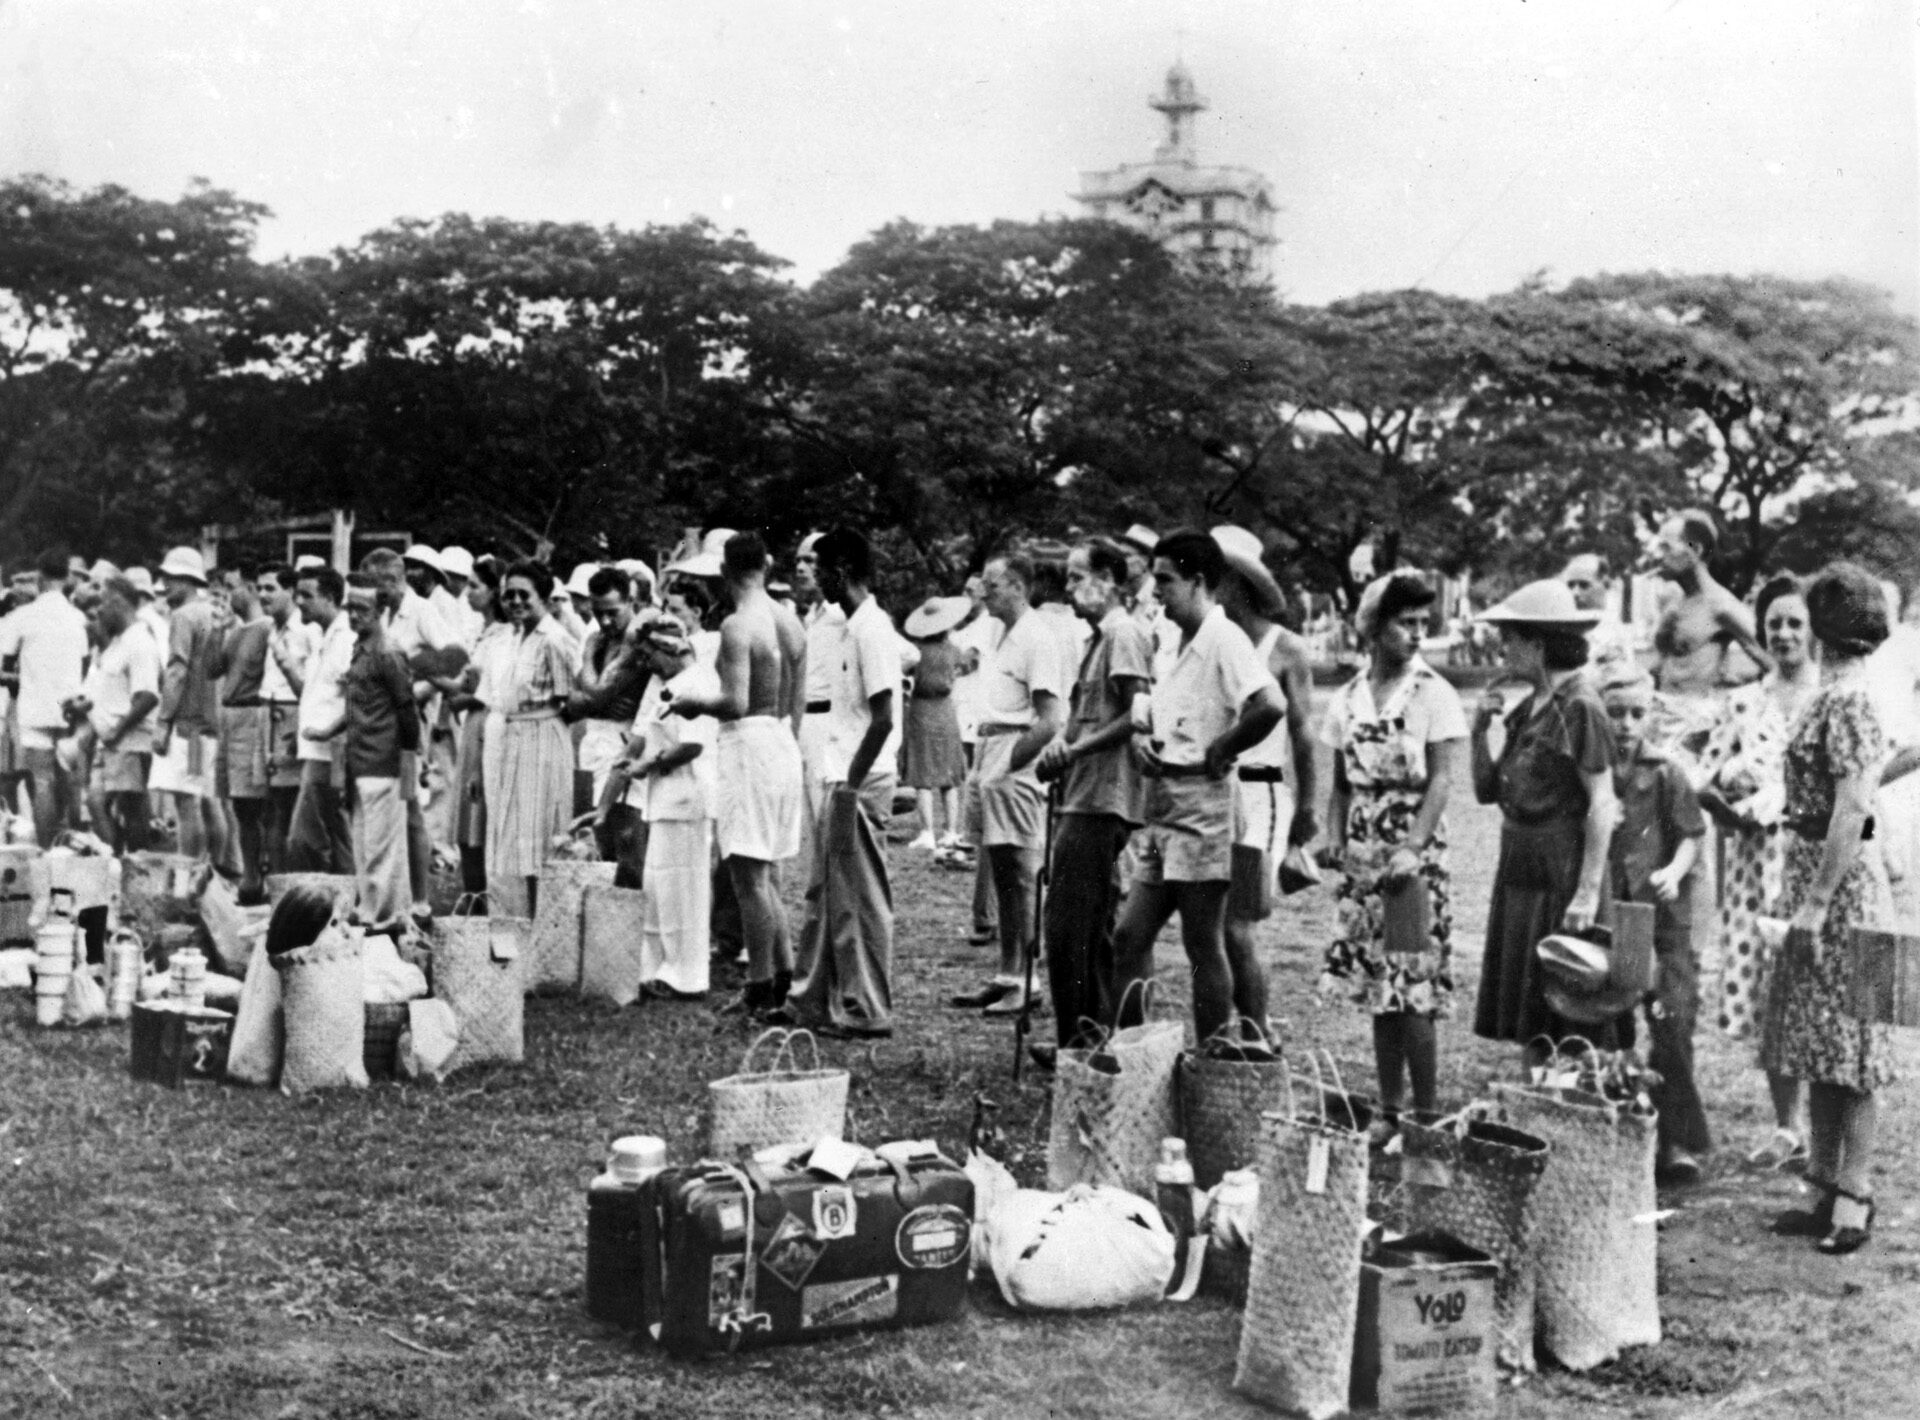 Following the fall of the Philippines in 1942, Americans and foreign nationals were rounded up by the victorious Japanese, and many were interned at Santo Tomas University.  In this photo, a group of internees gathers at the command of the Japanese, bringing along what few belongings they could carry.